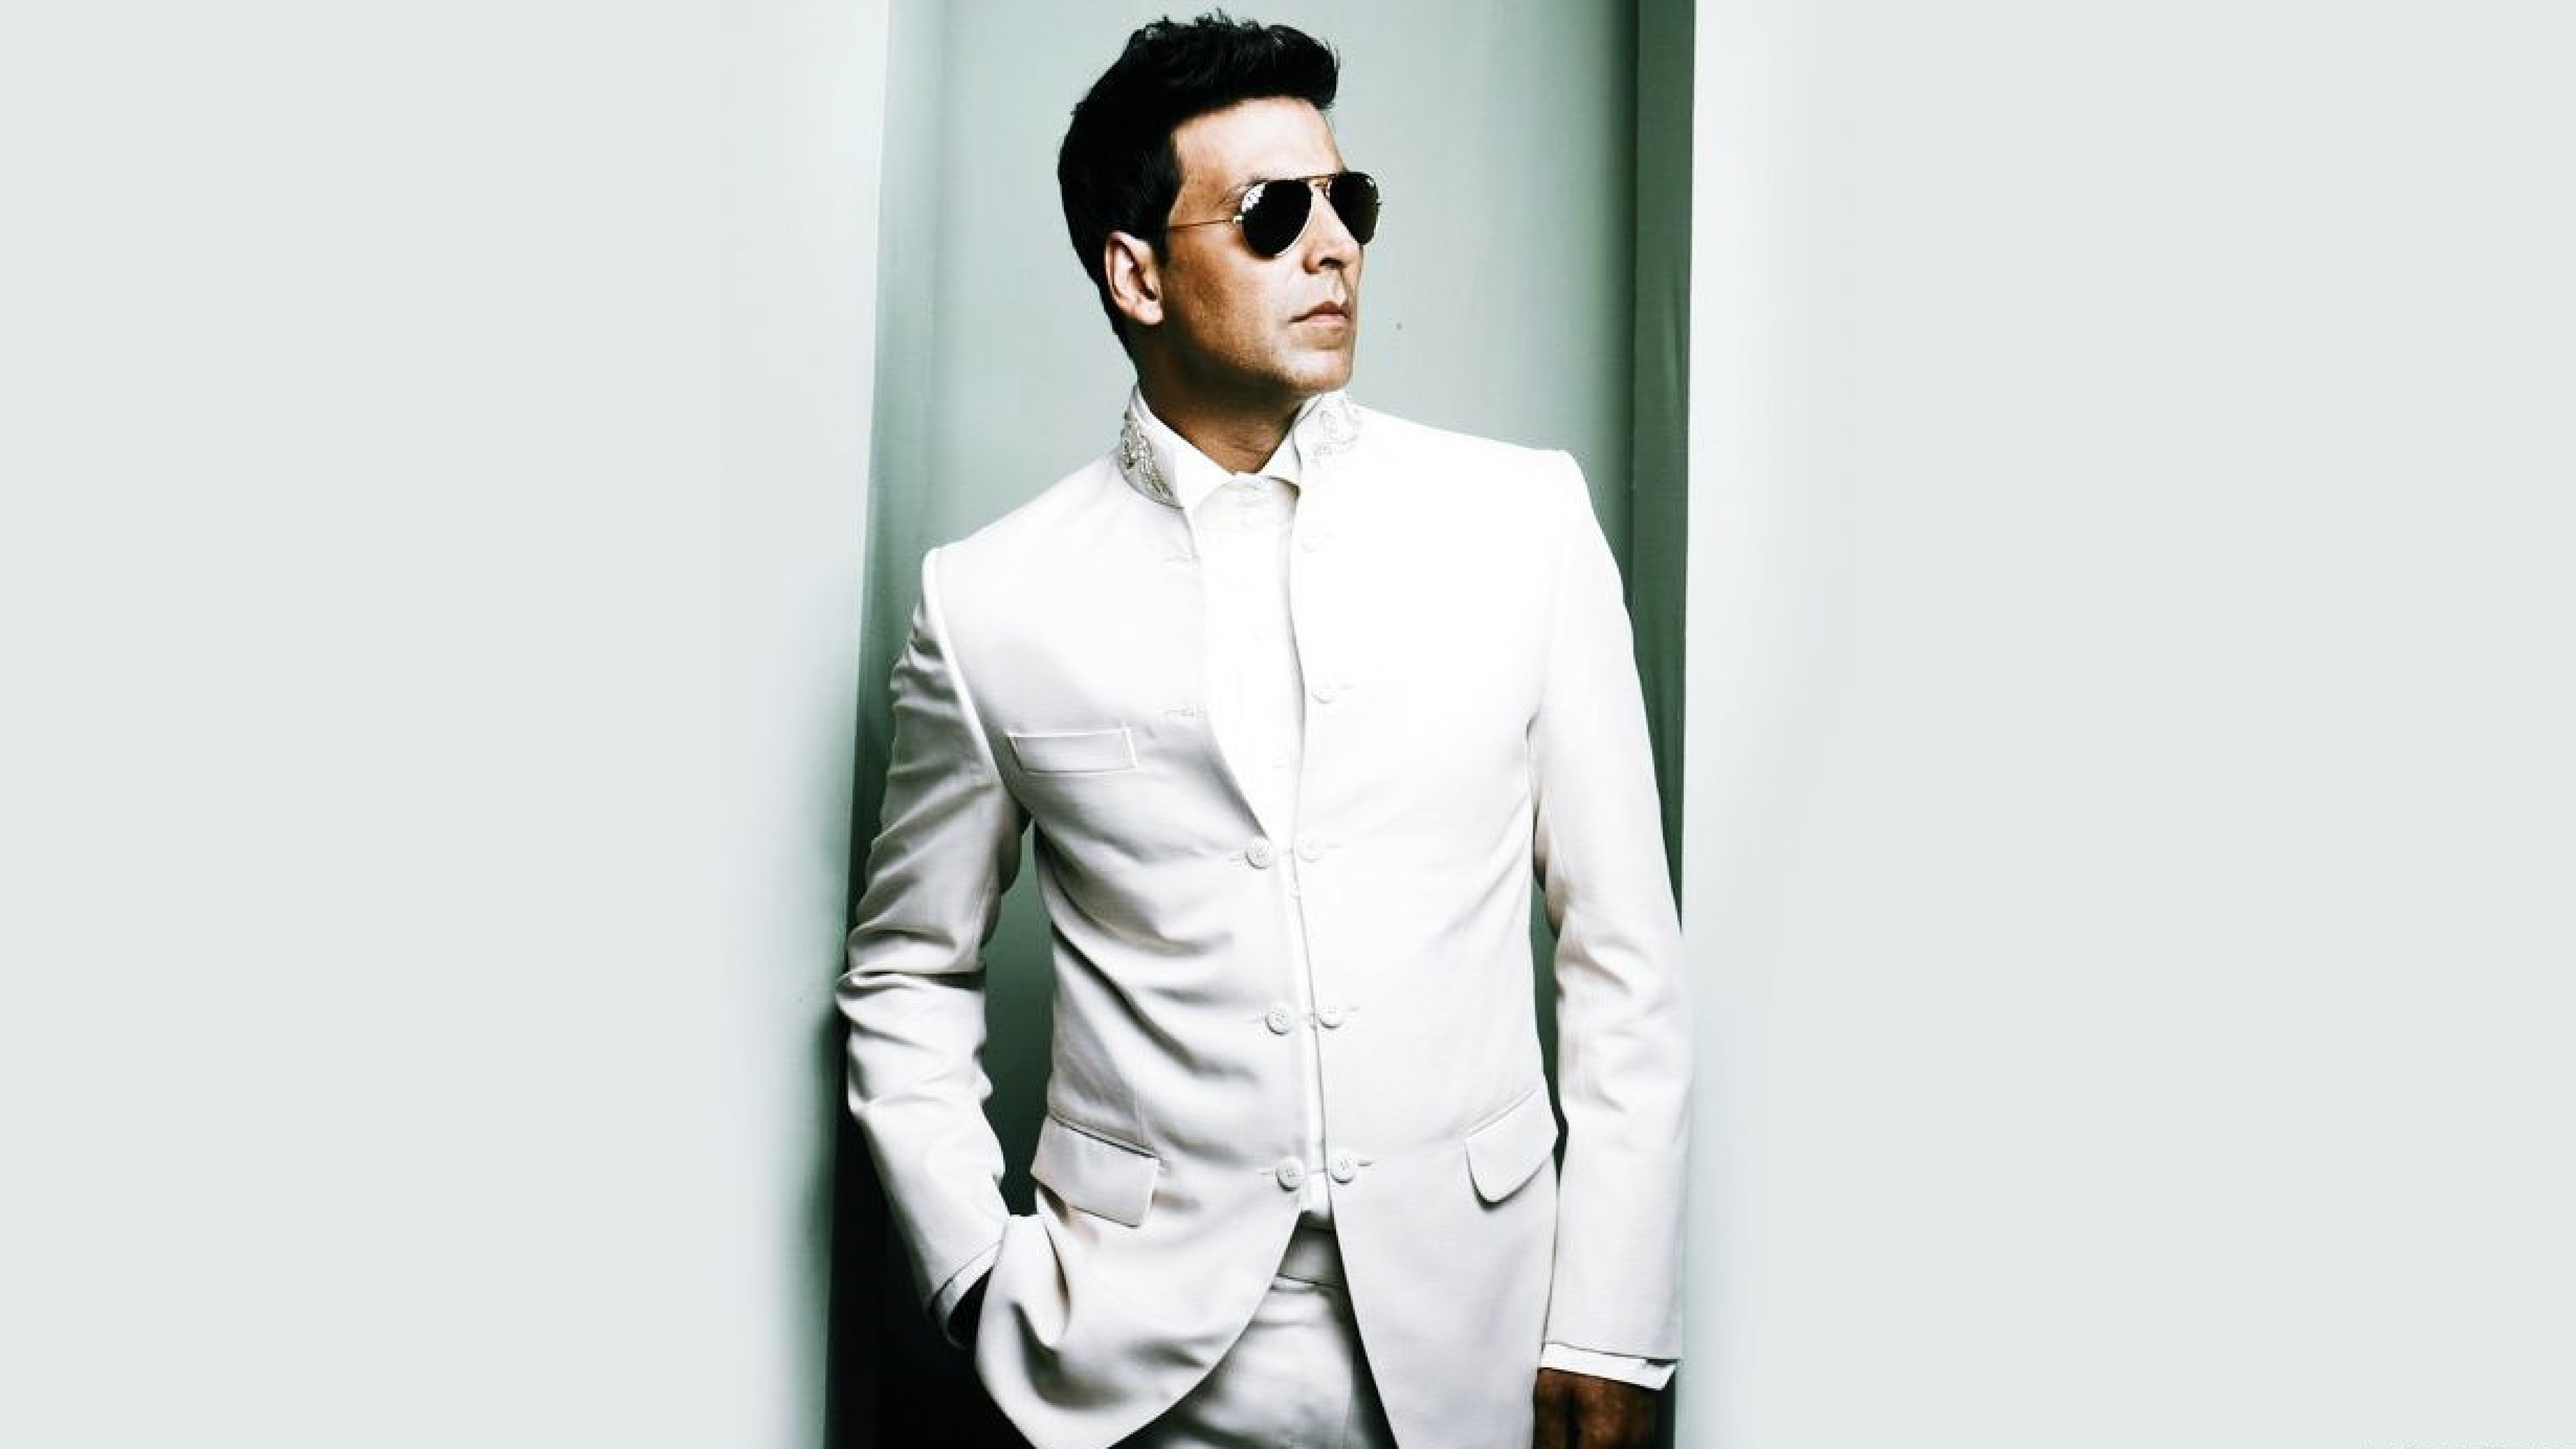 7680x4320 Akshay Kumar in glasees 8K Wallpaper, HD Celebrities 4K  Wallpapers, Images, Photos and Background - Wallpapers Den